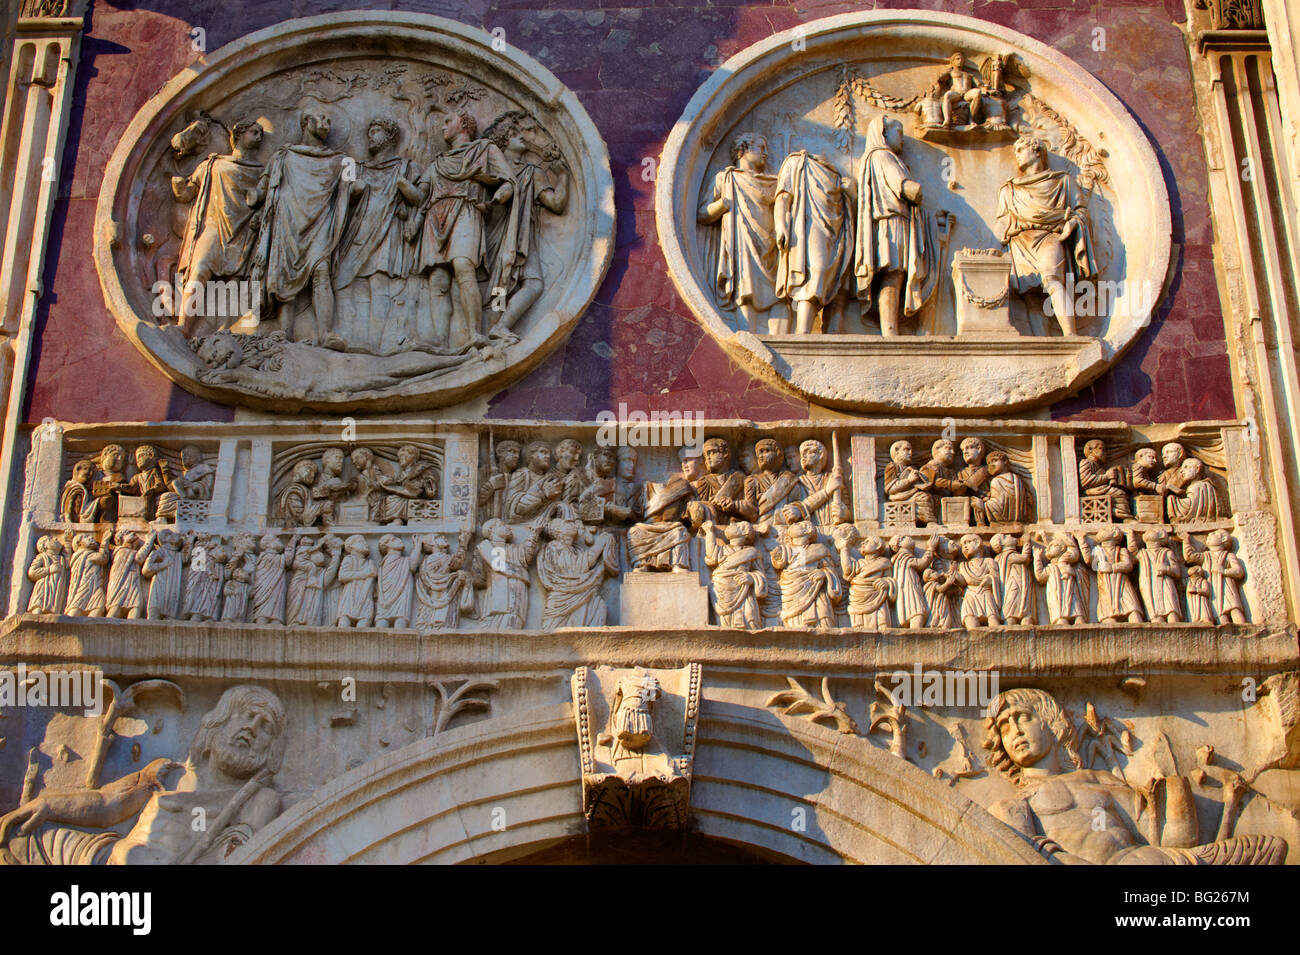 Roman sculptural decorations on The Arch Of Constantine built to celebrate victory over Maxentius . Rome. Rome Stock Photo